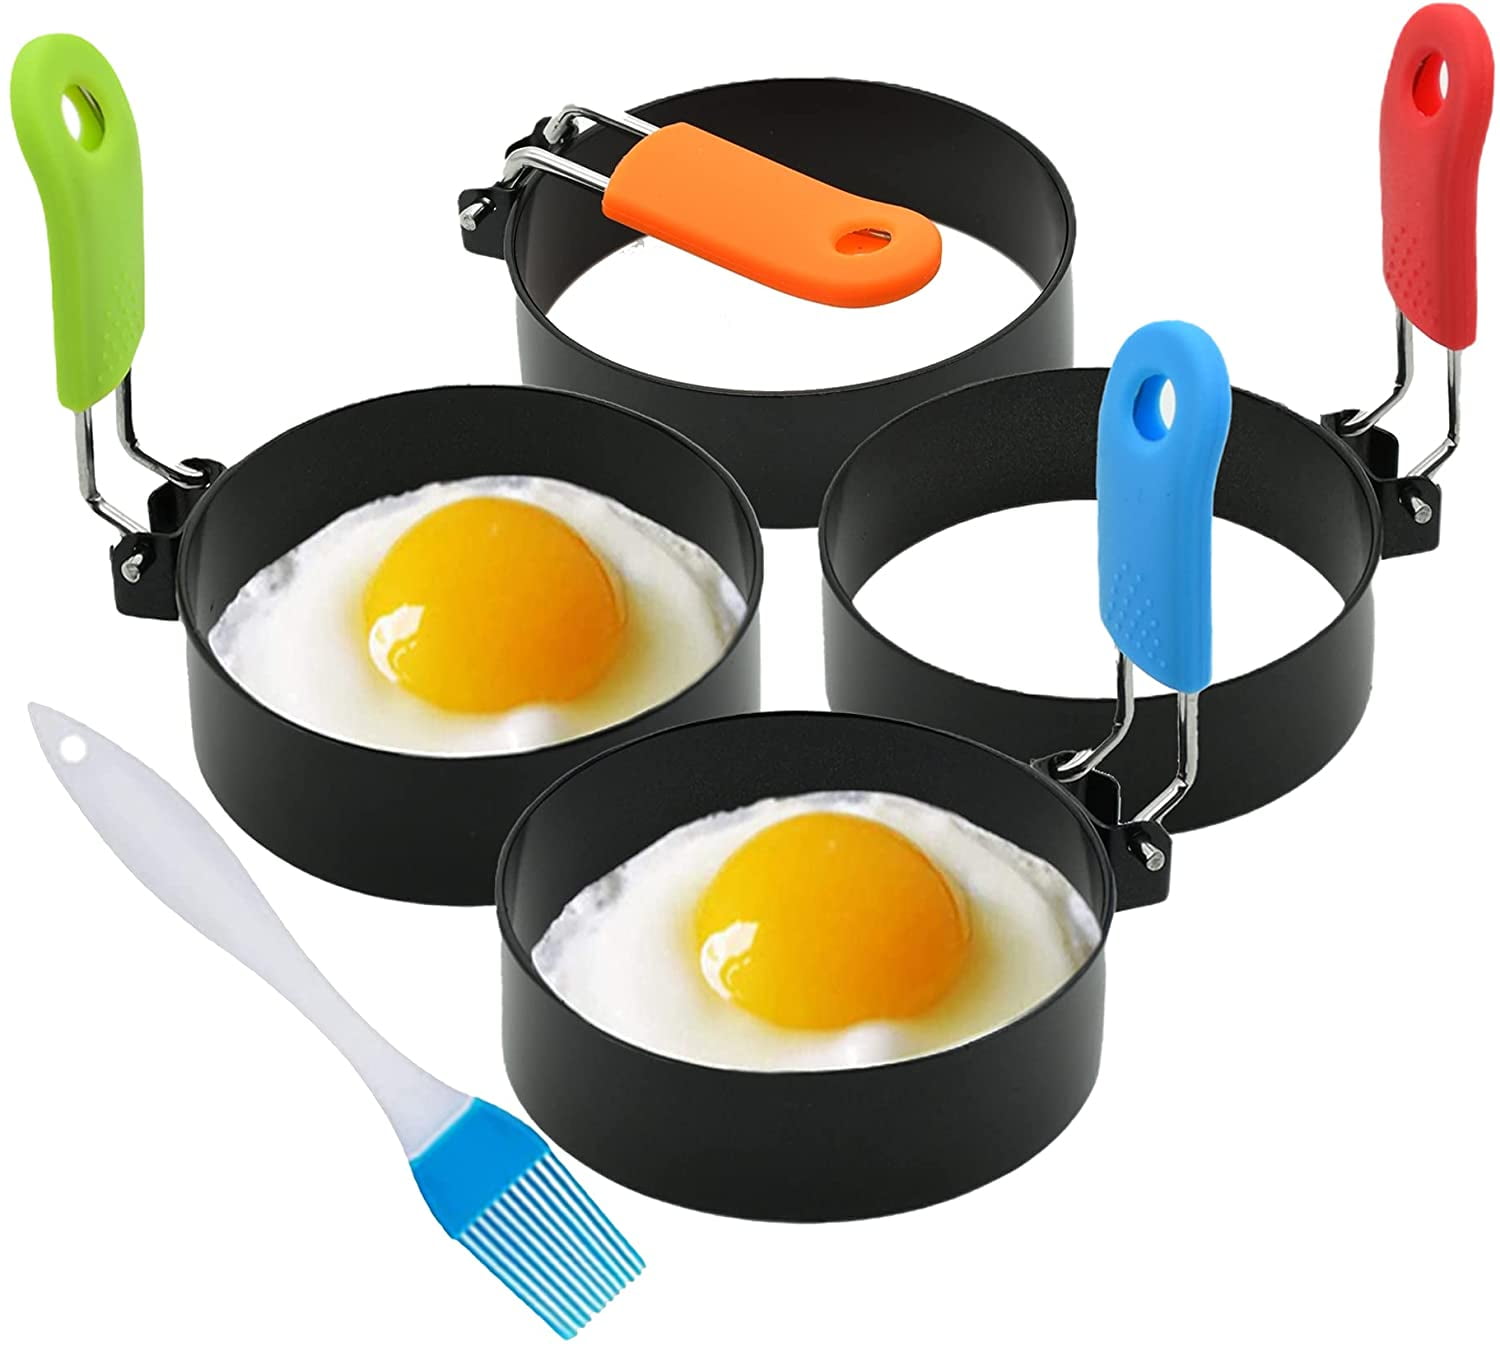 Egg Ring Mold Pancake Maker Fried Eggs Nonstick Molds Kitchen Tools Accessories 